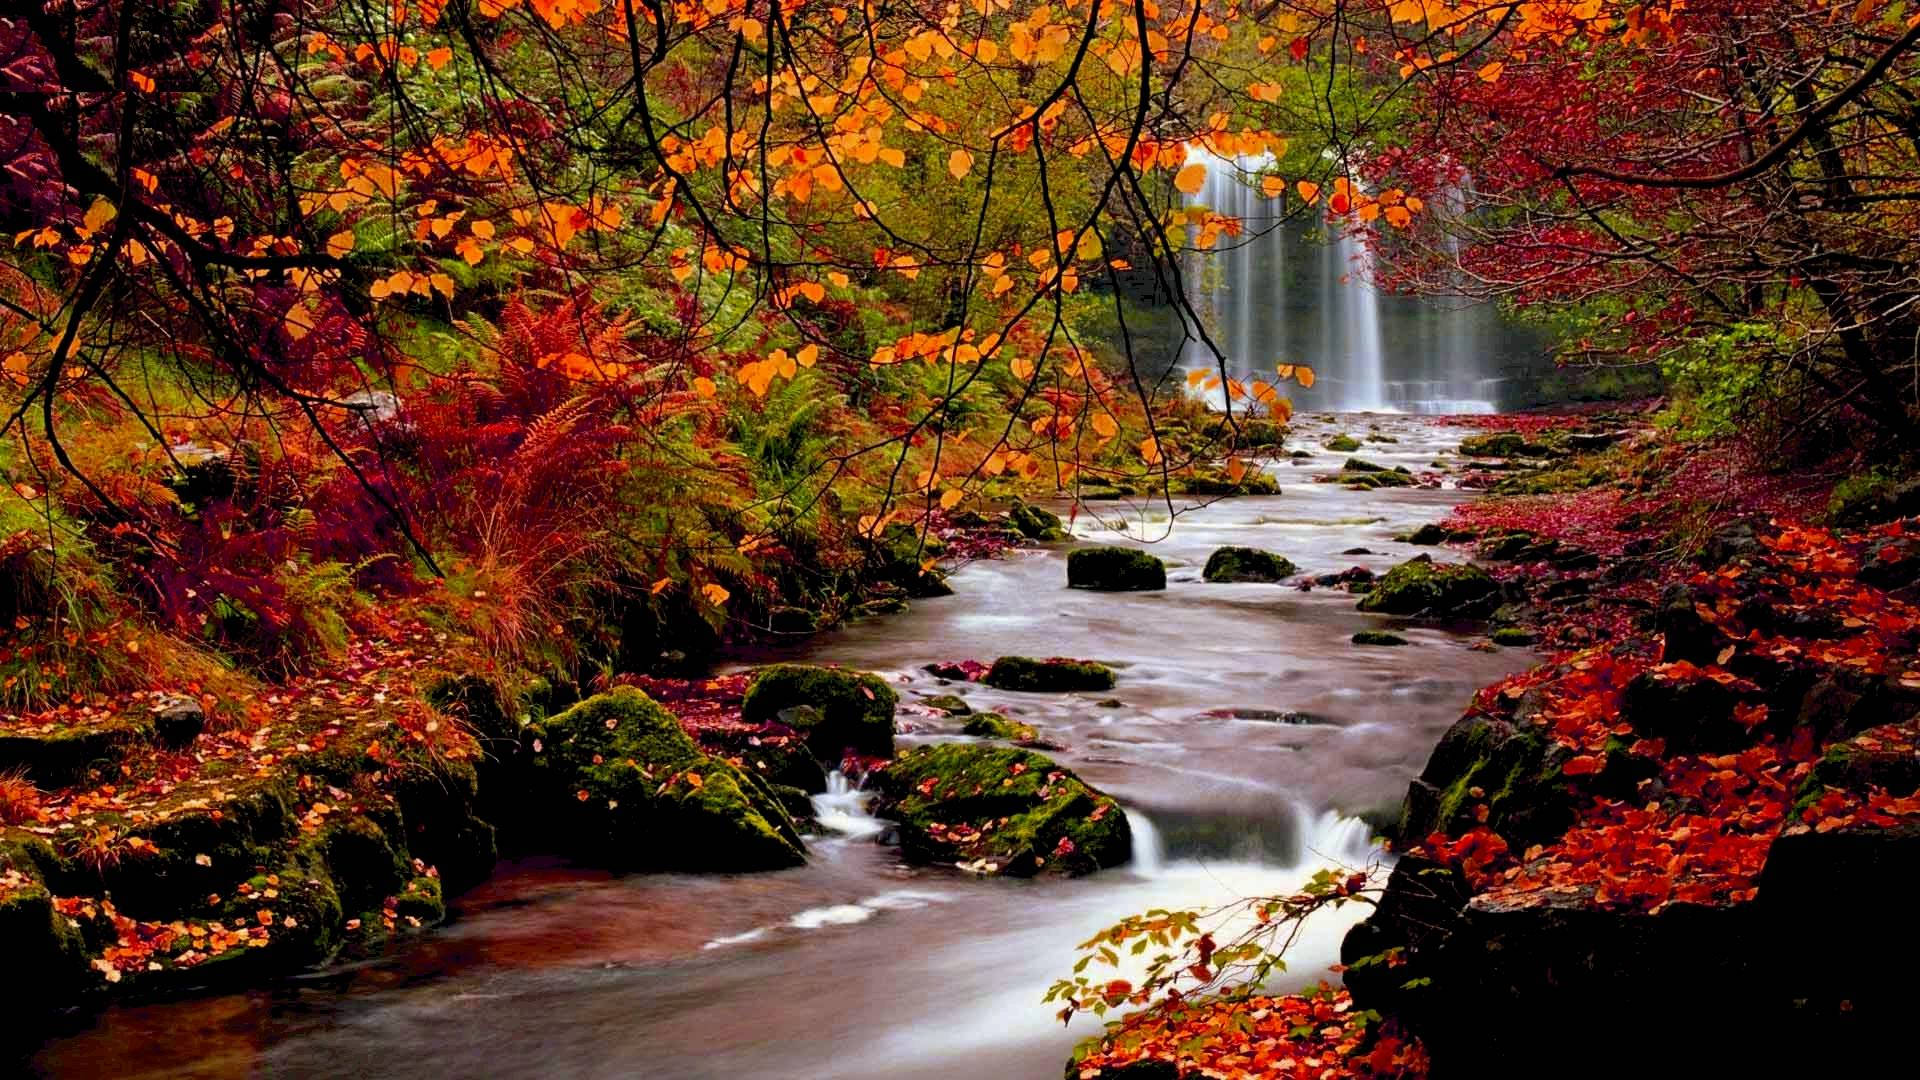 Streams of water from waterfalls with orange and red maple trees during autumn season.